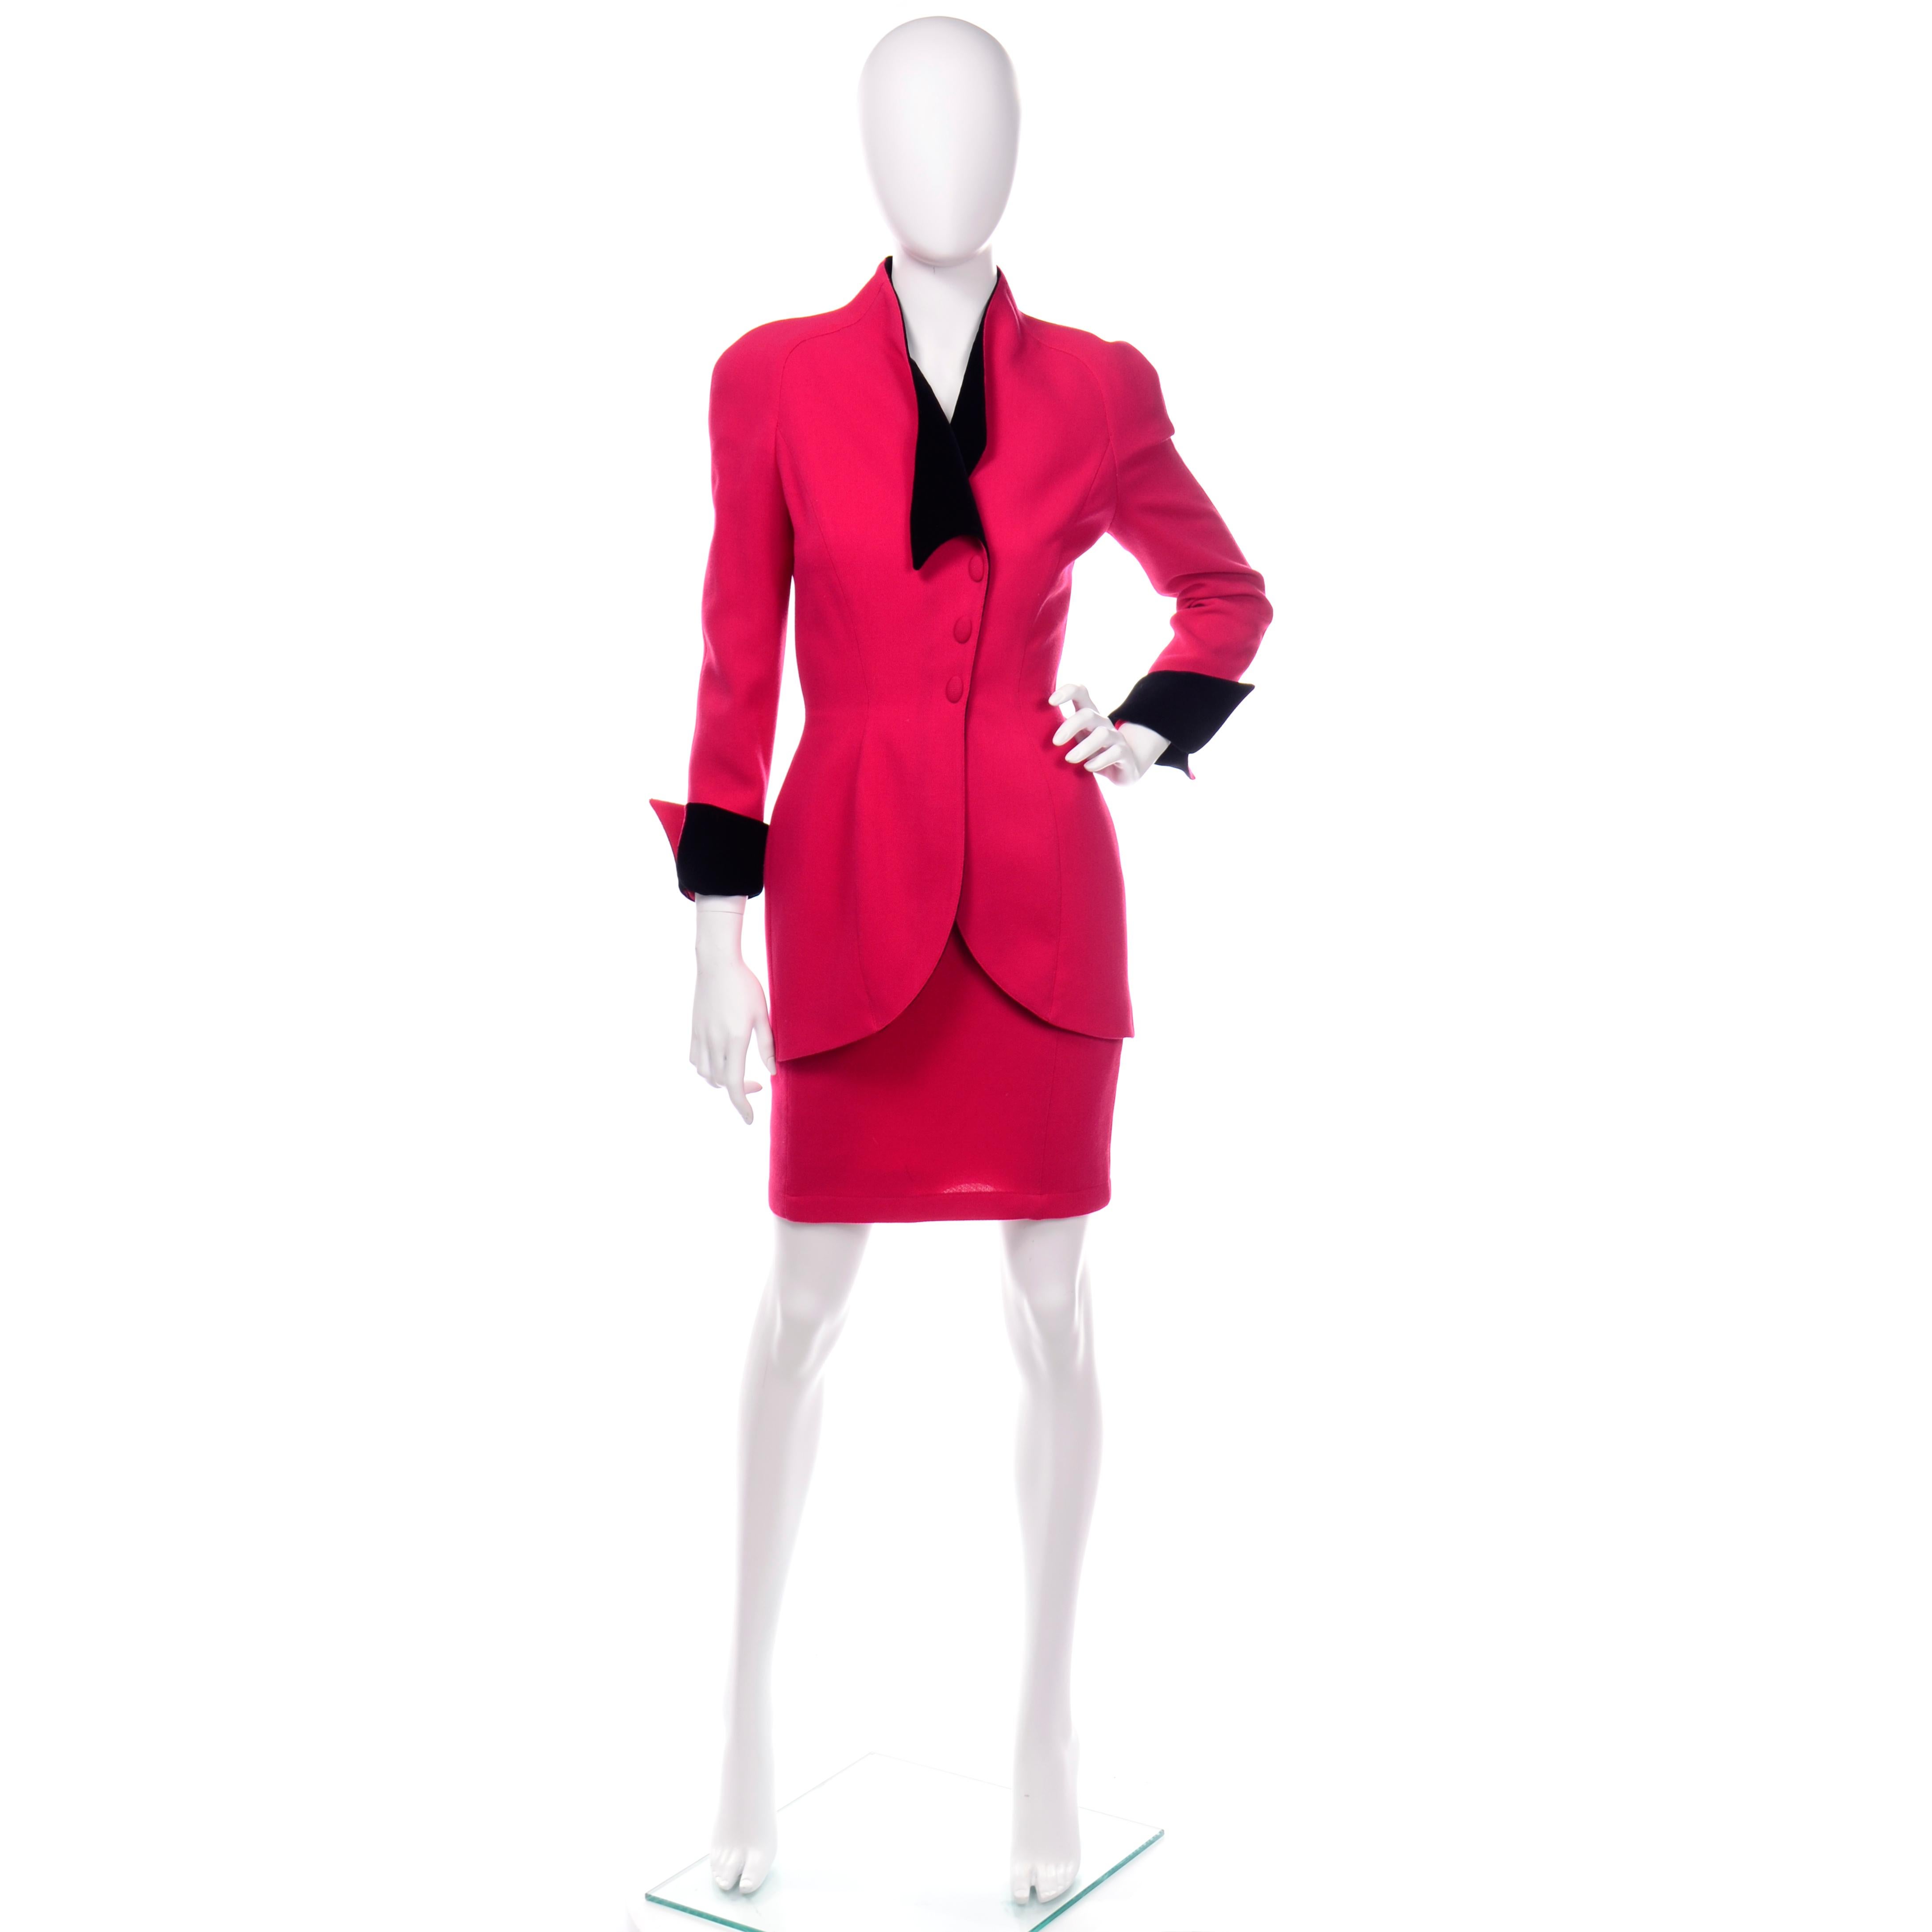 This is a fabulous vintage Thierry Mugler 2 piece skirt suit with a cinched waist blazer and a slim pencil skirt. The suit is in a strawberry red wool and is lined in cotton. The jacket buttons up the front and has upturned black velvet cuffs and a